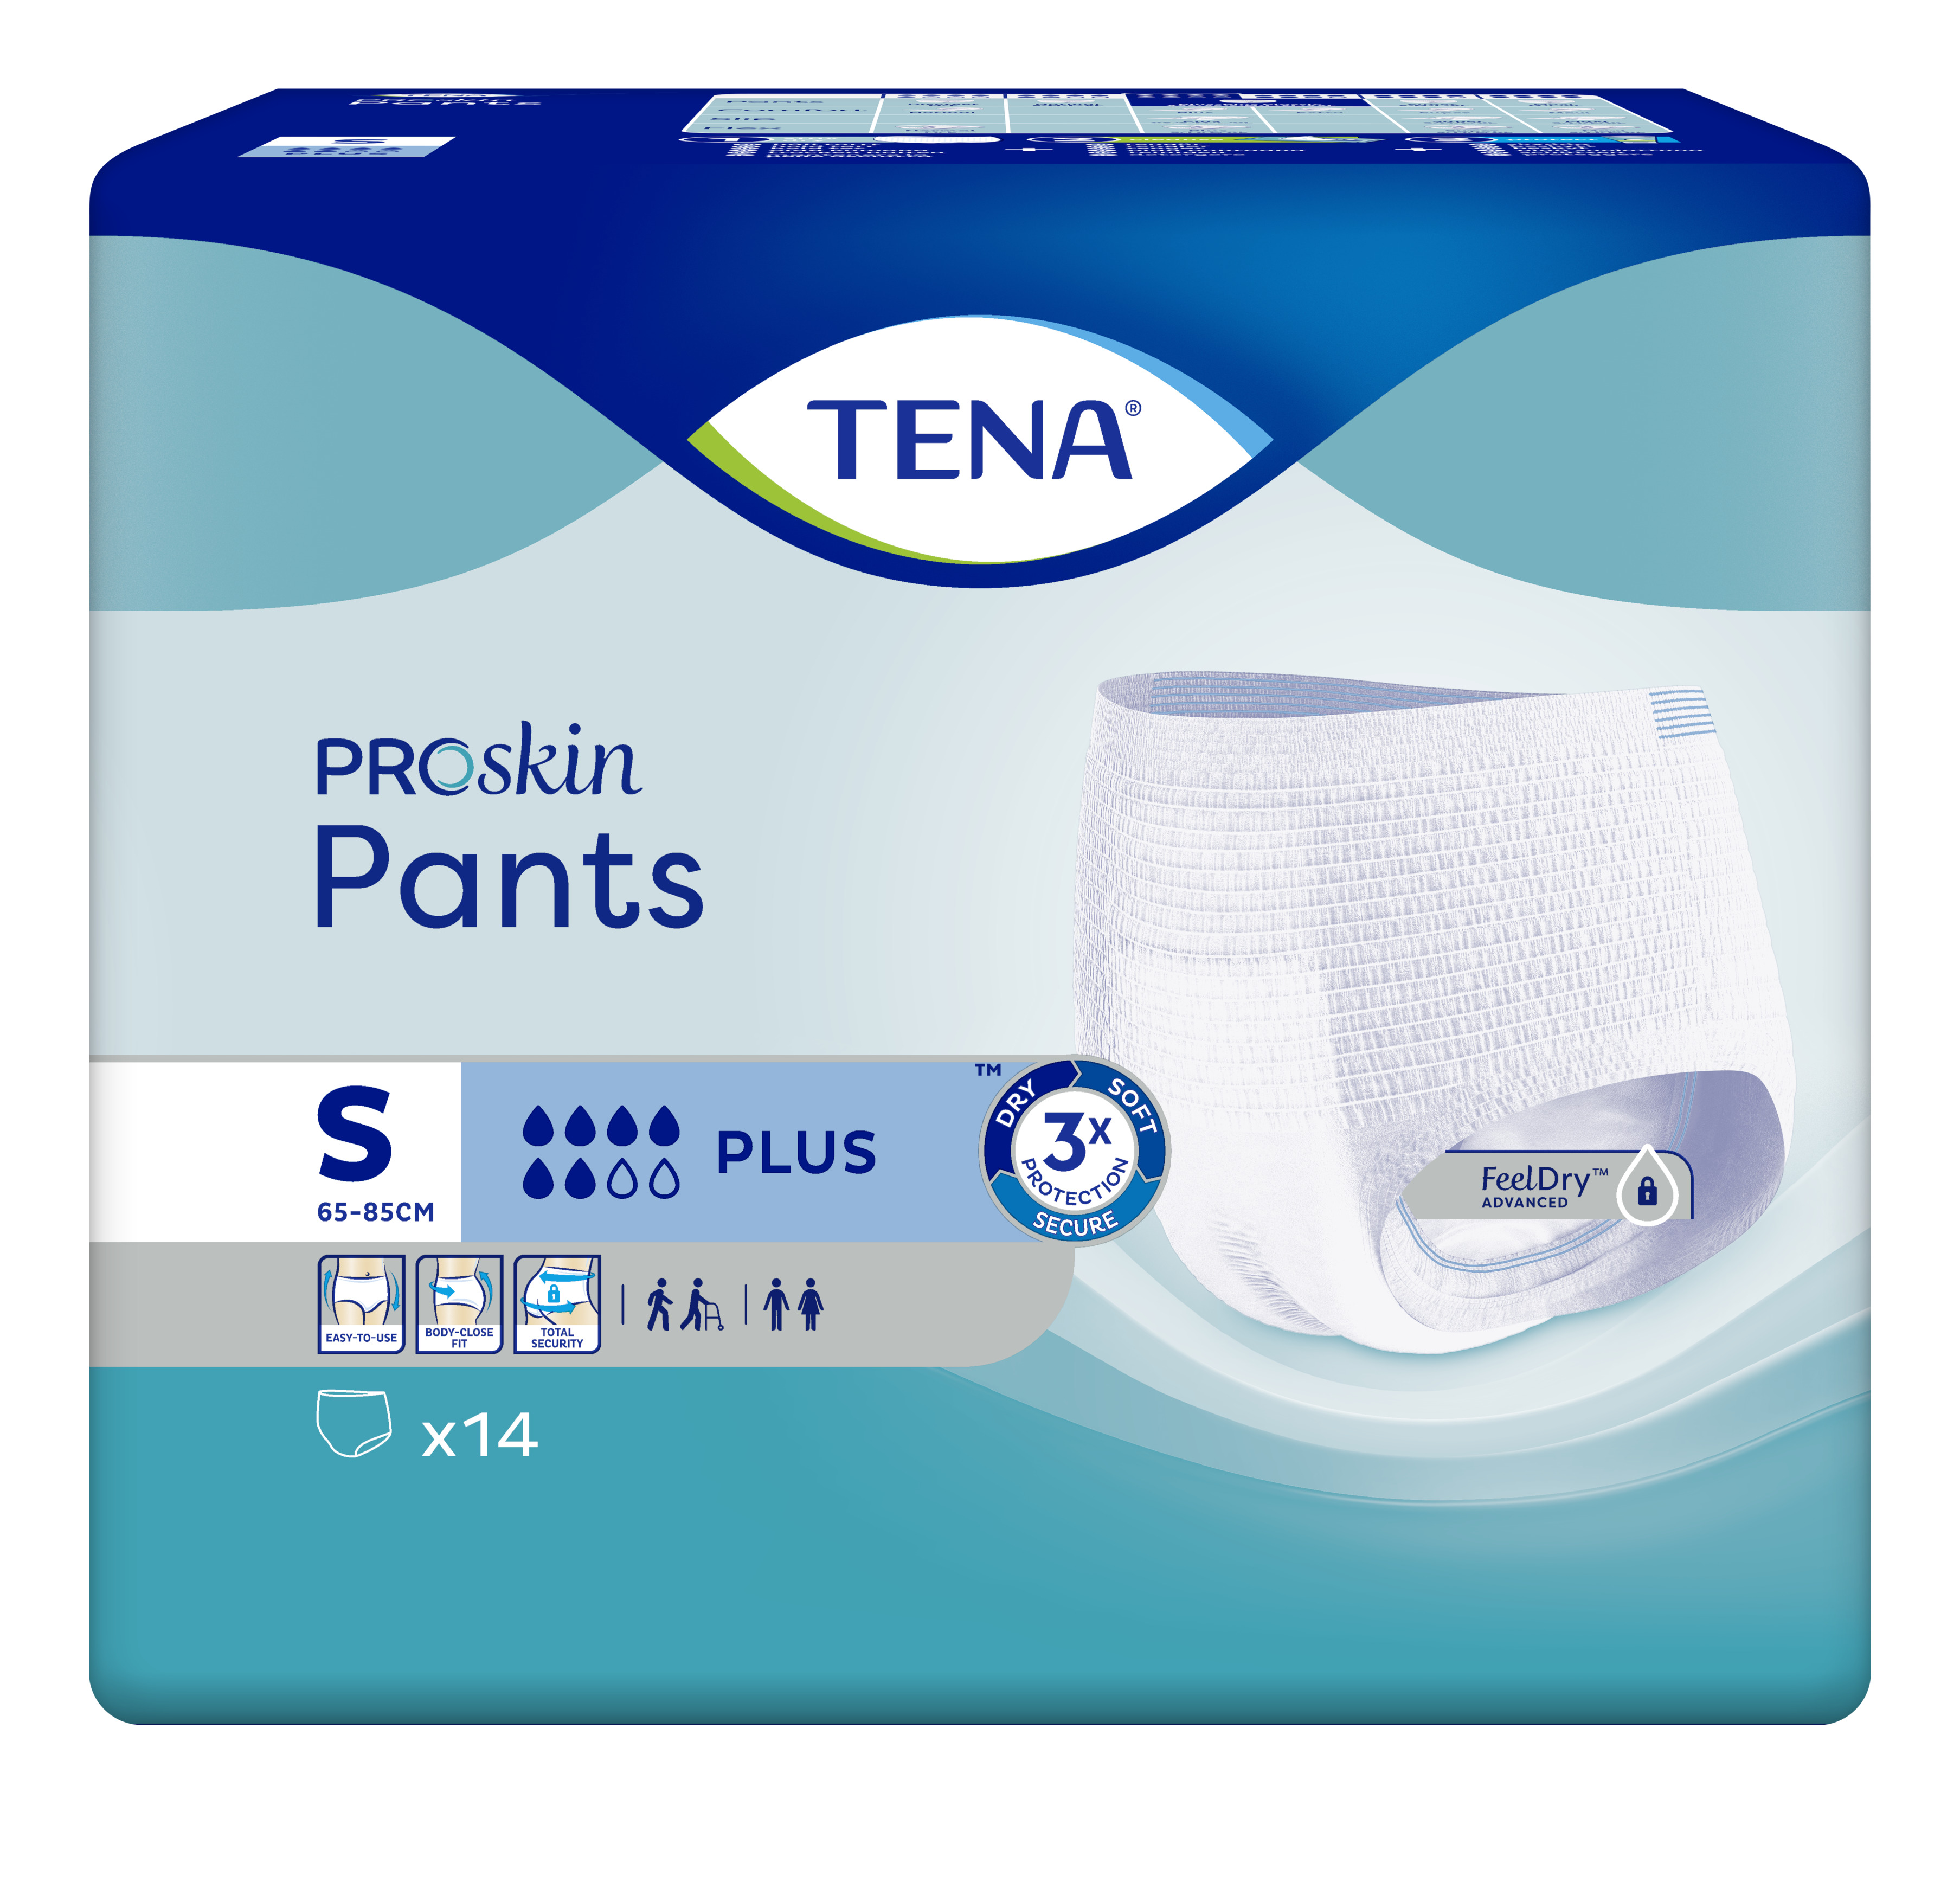 TENA Pro Skin Comfort Incontinence Pads. EXTRA | Advantage First Aid